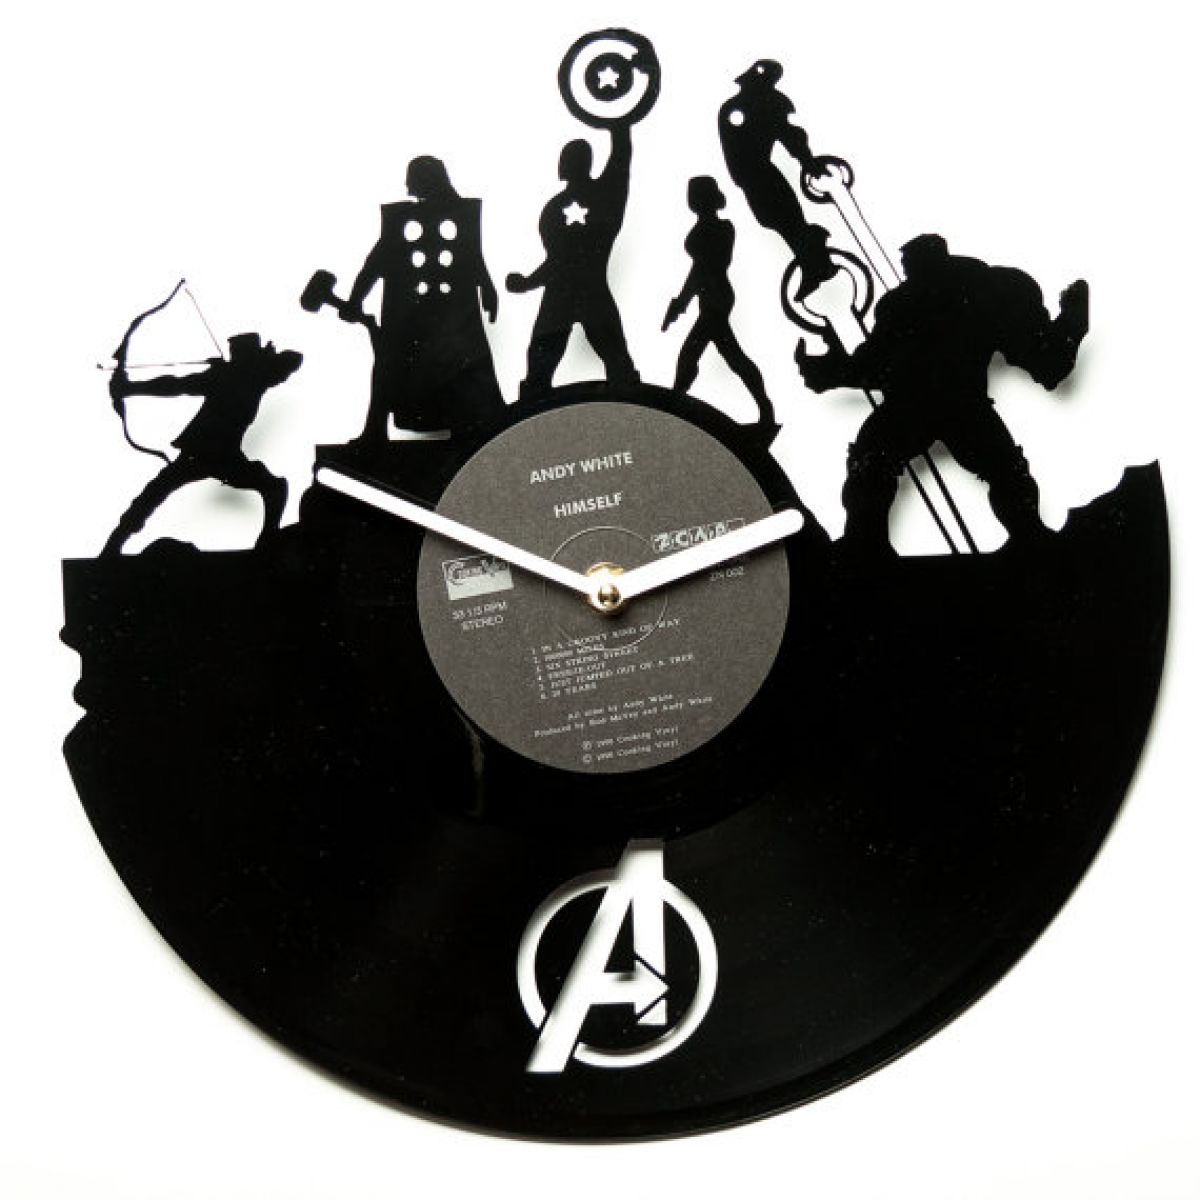 Avengers clock of an old vinyl piece has special retro charm